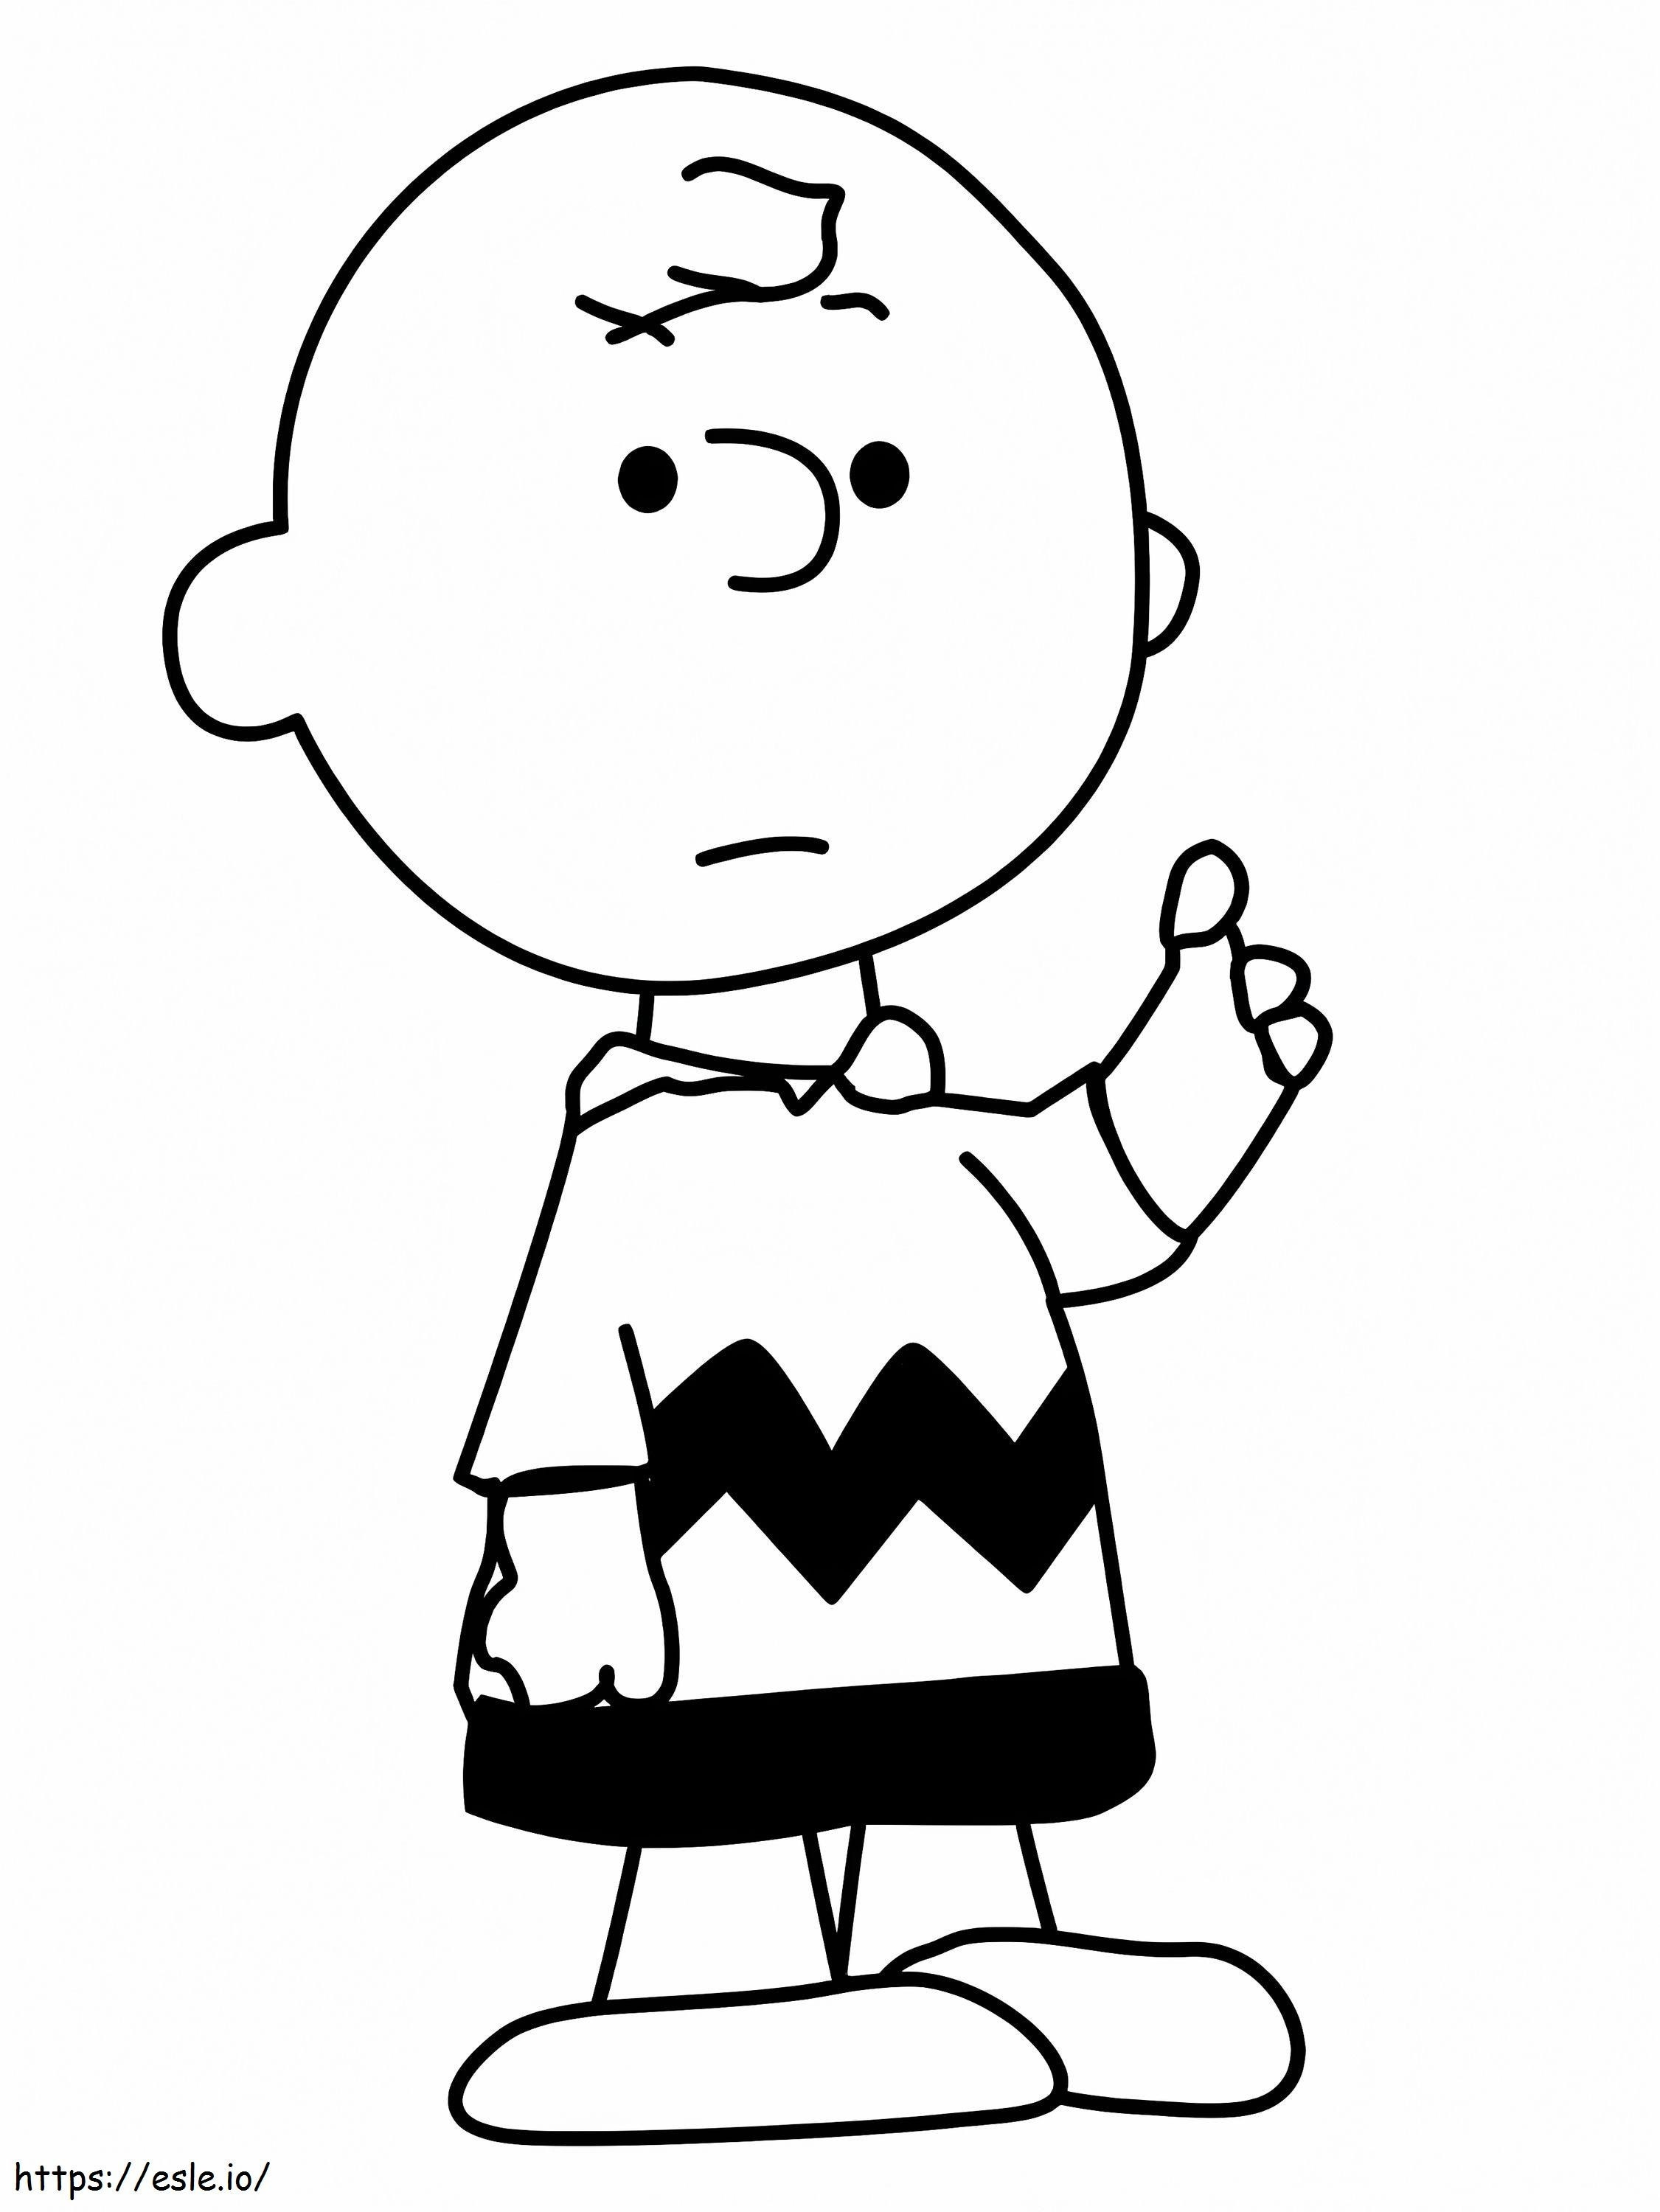 Charlie Brown 1 coloring page